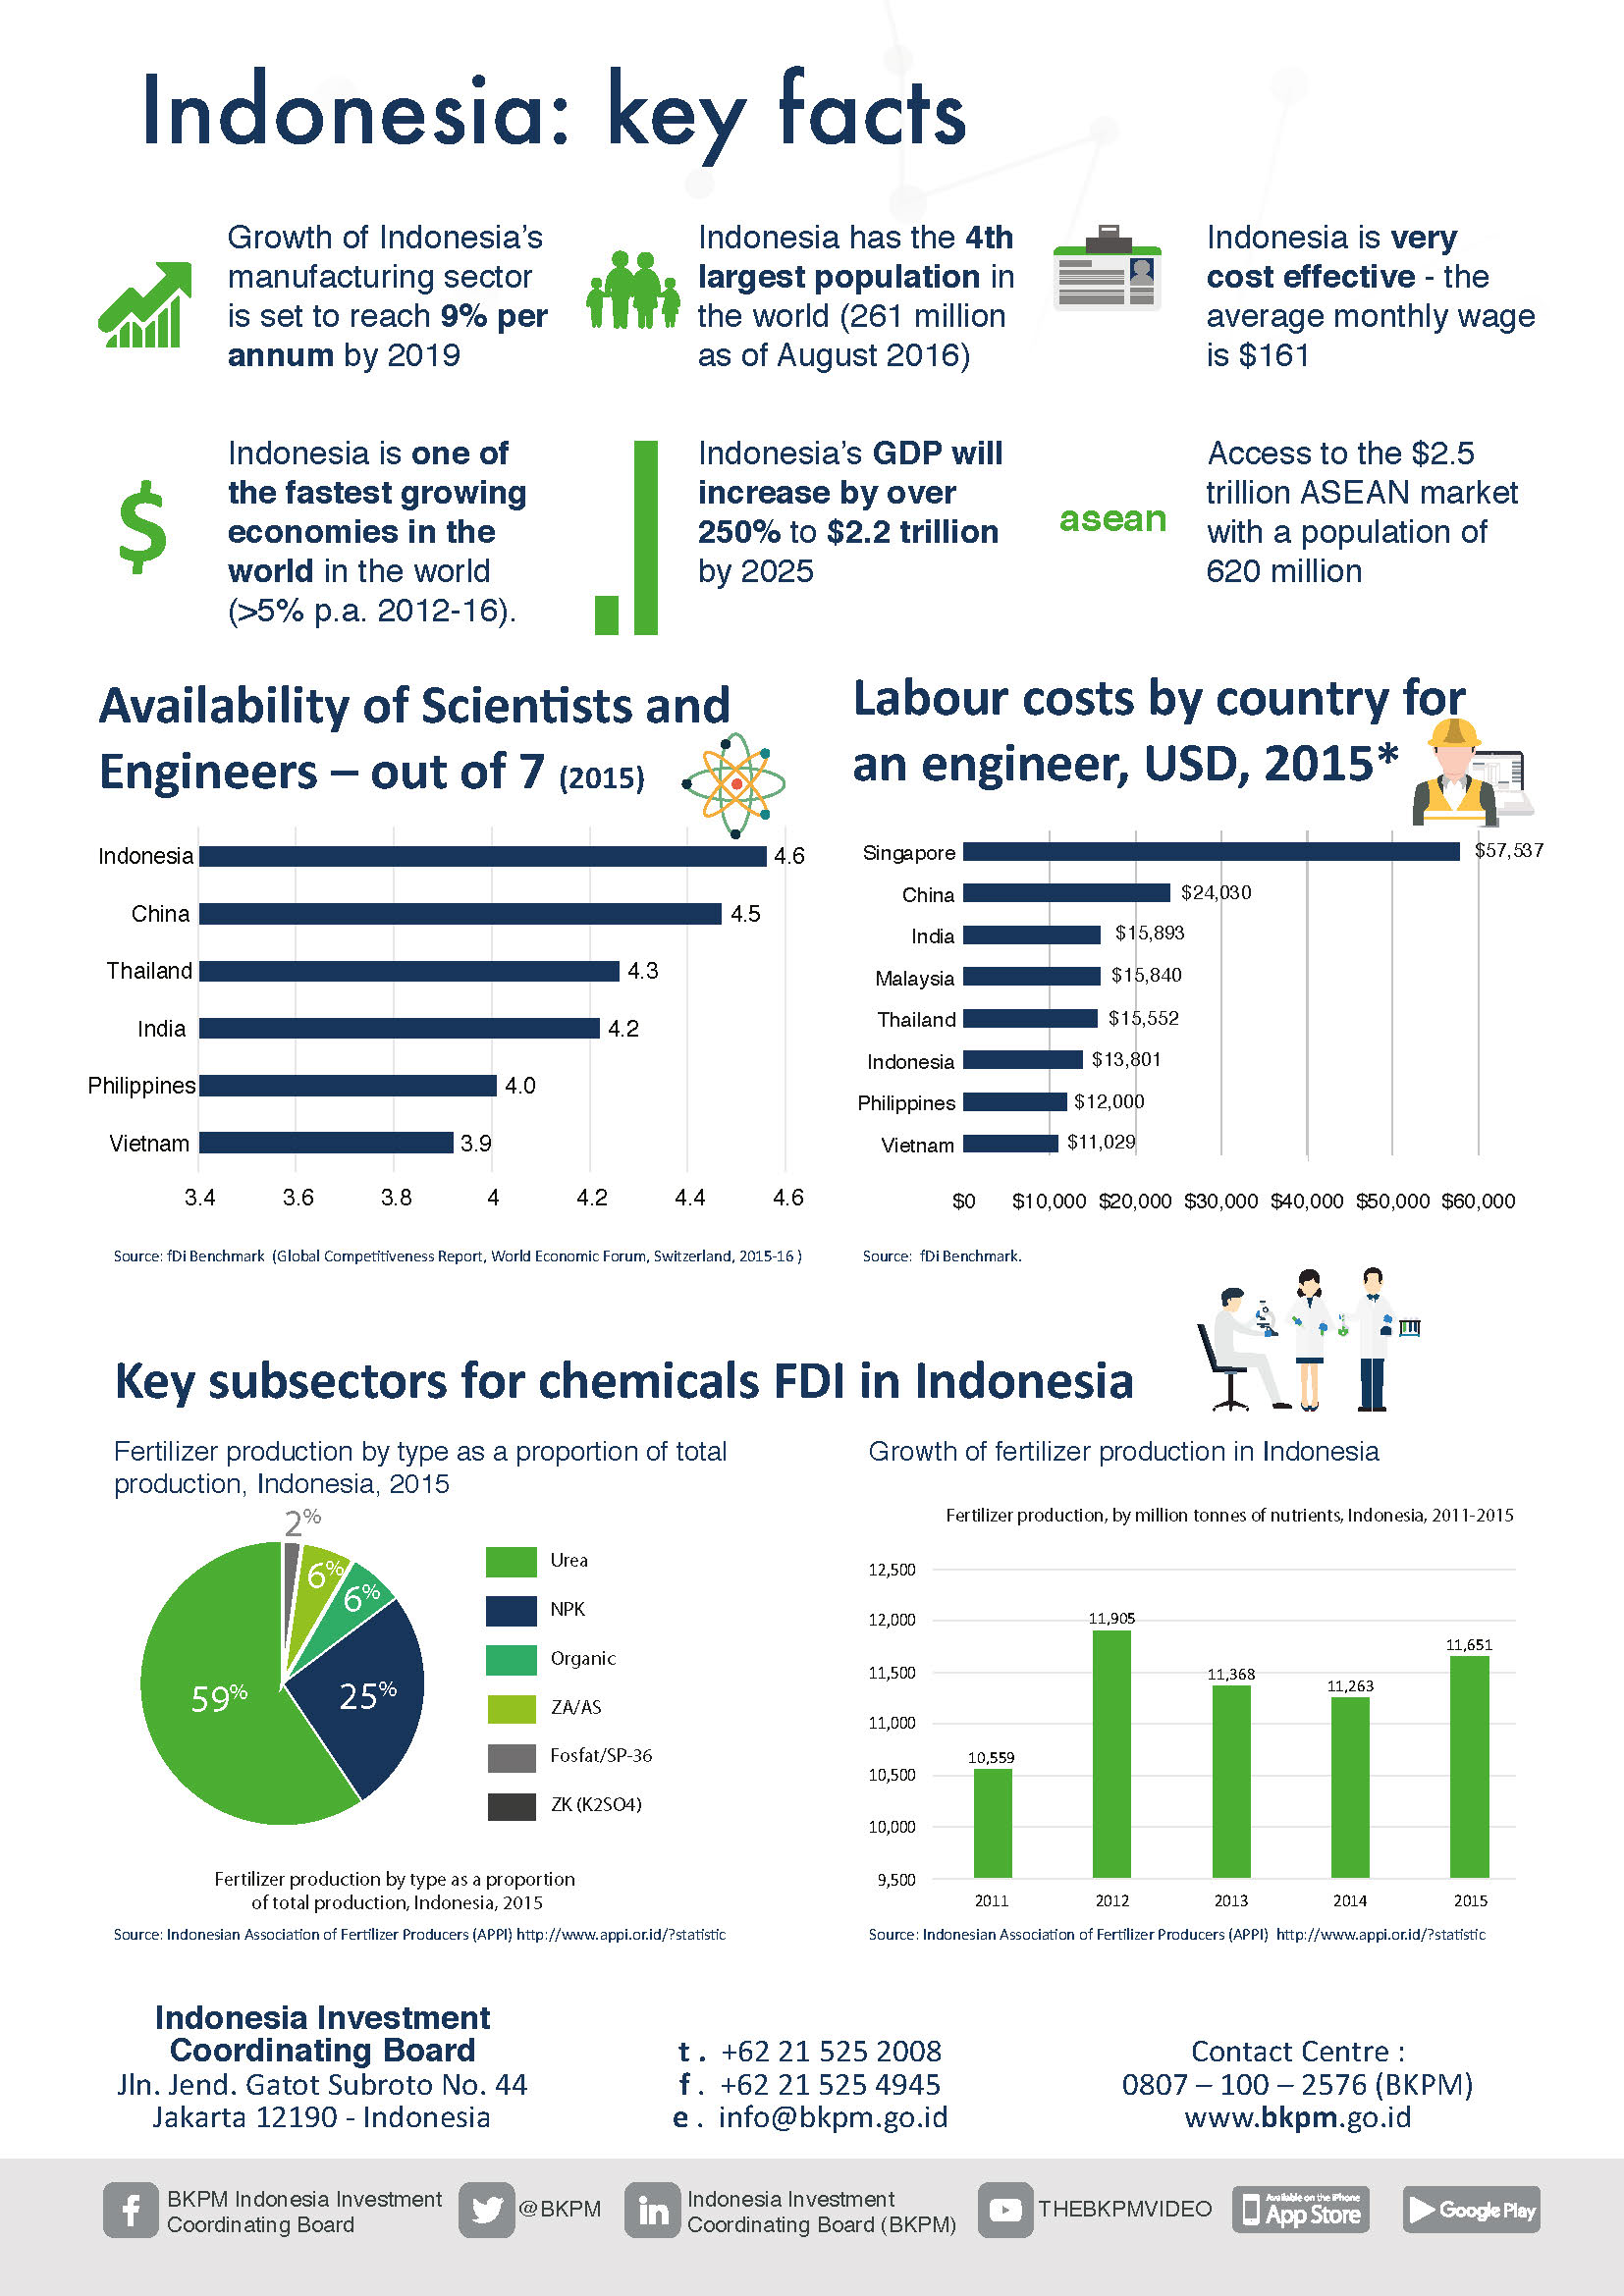 Why Invest in Indonesia’s Chemicals Sector?